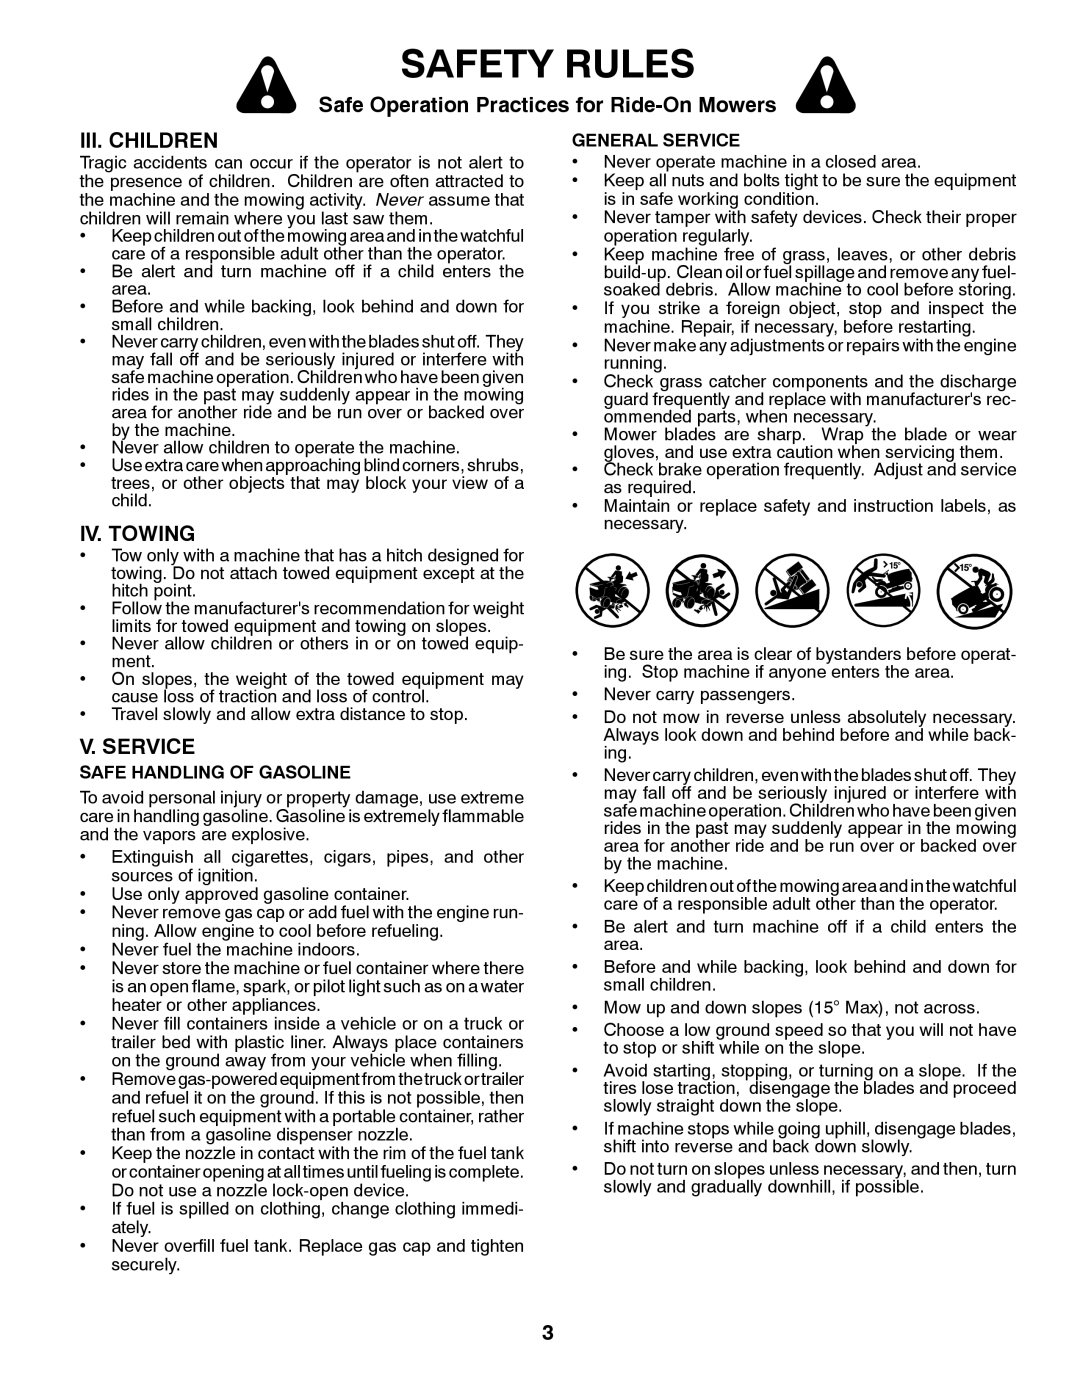 Murray MX17542LT manual Iii. Children, Iv. Towing, V. Service, Safety Rules, Safe Operation Practices for Ride-On Mowers 